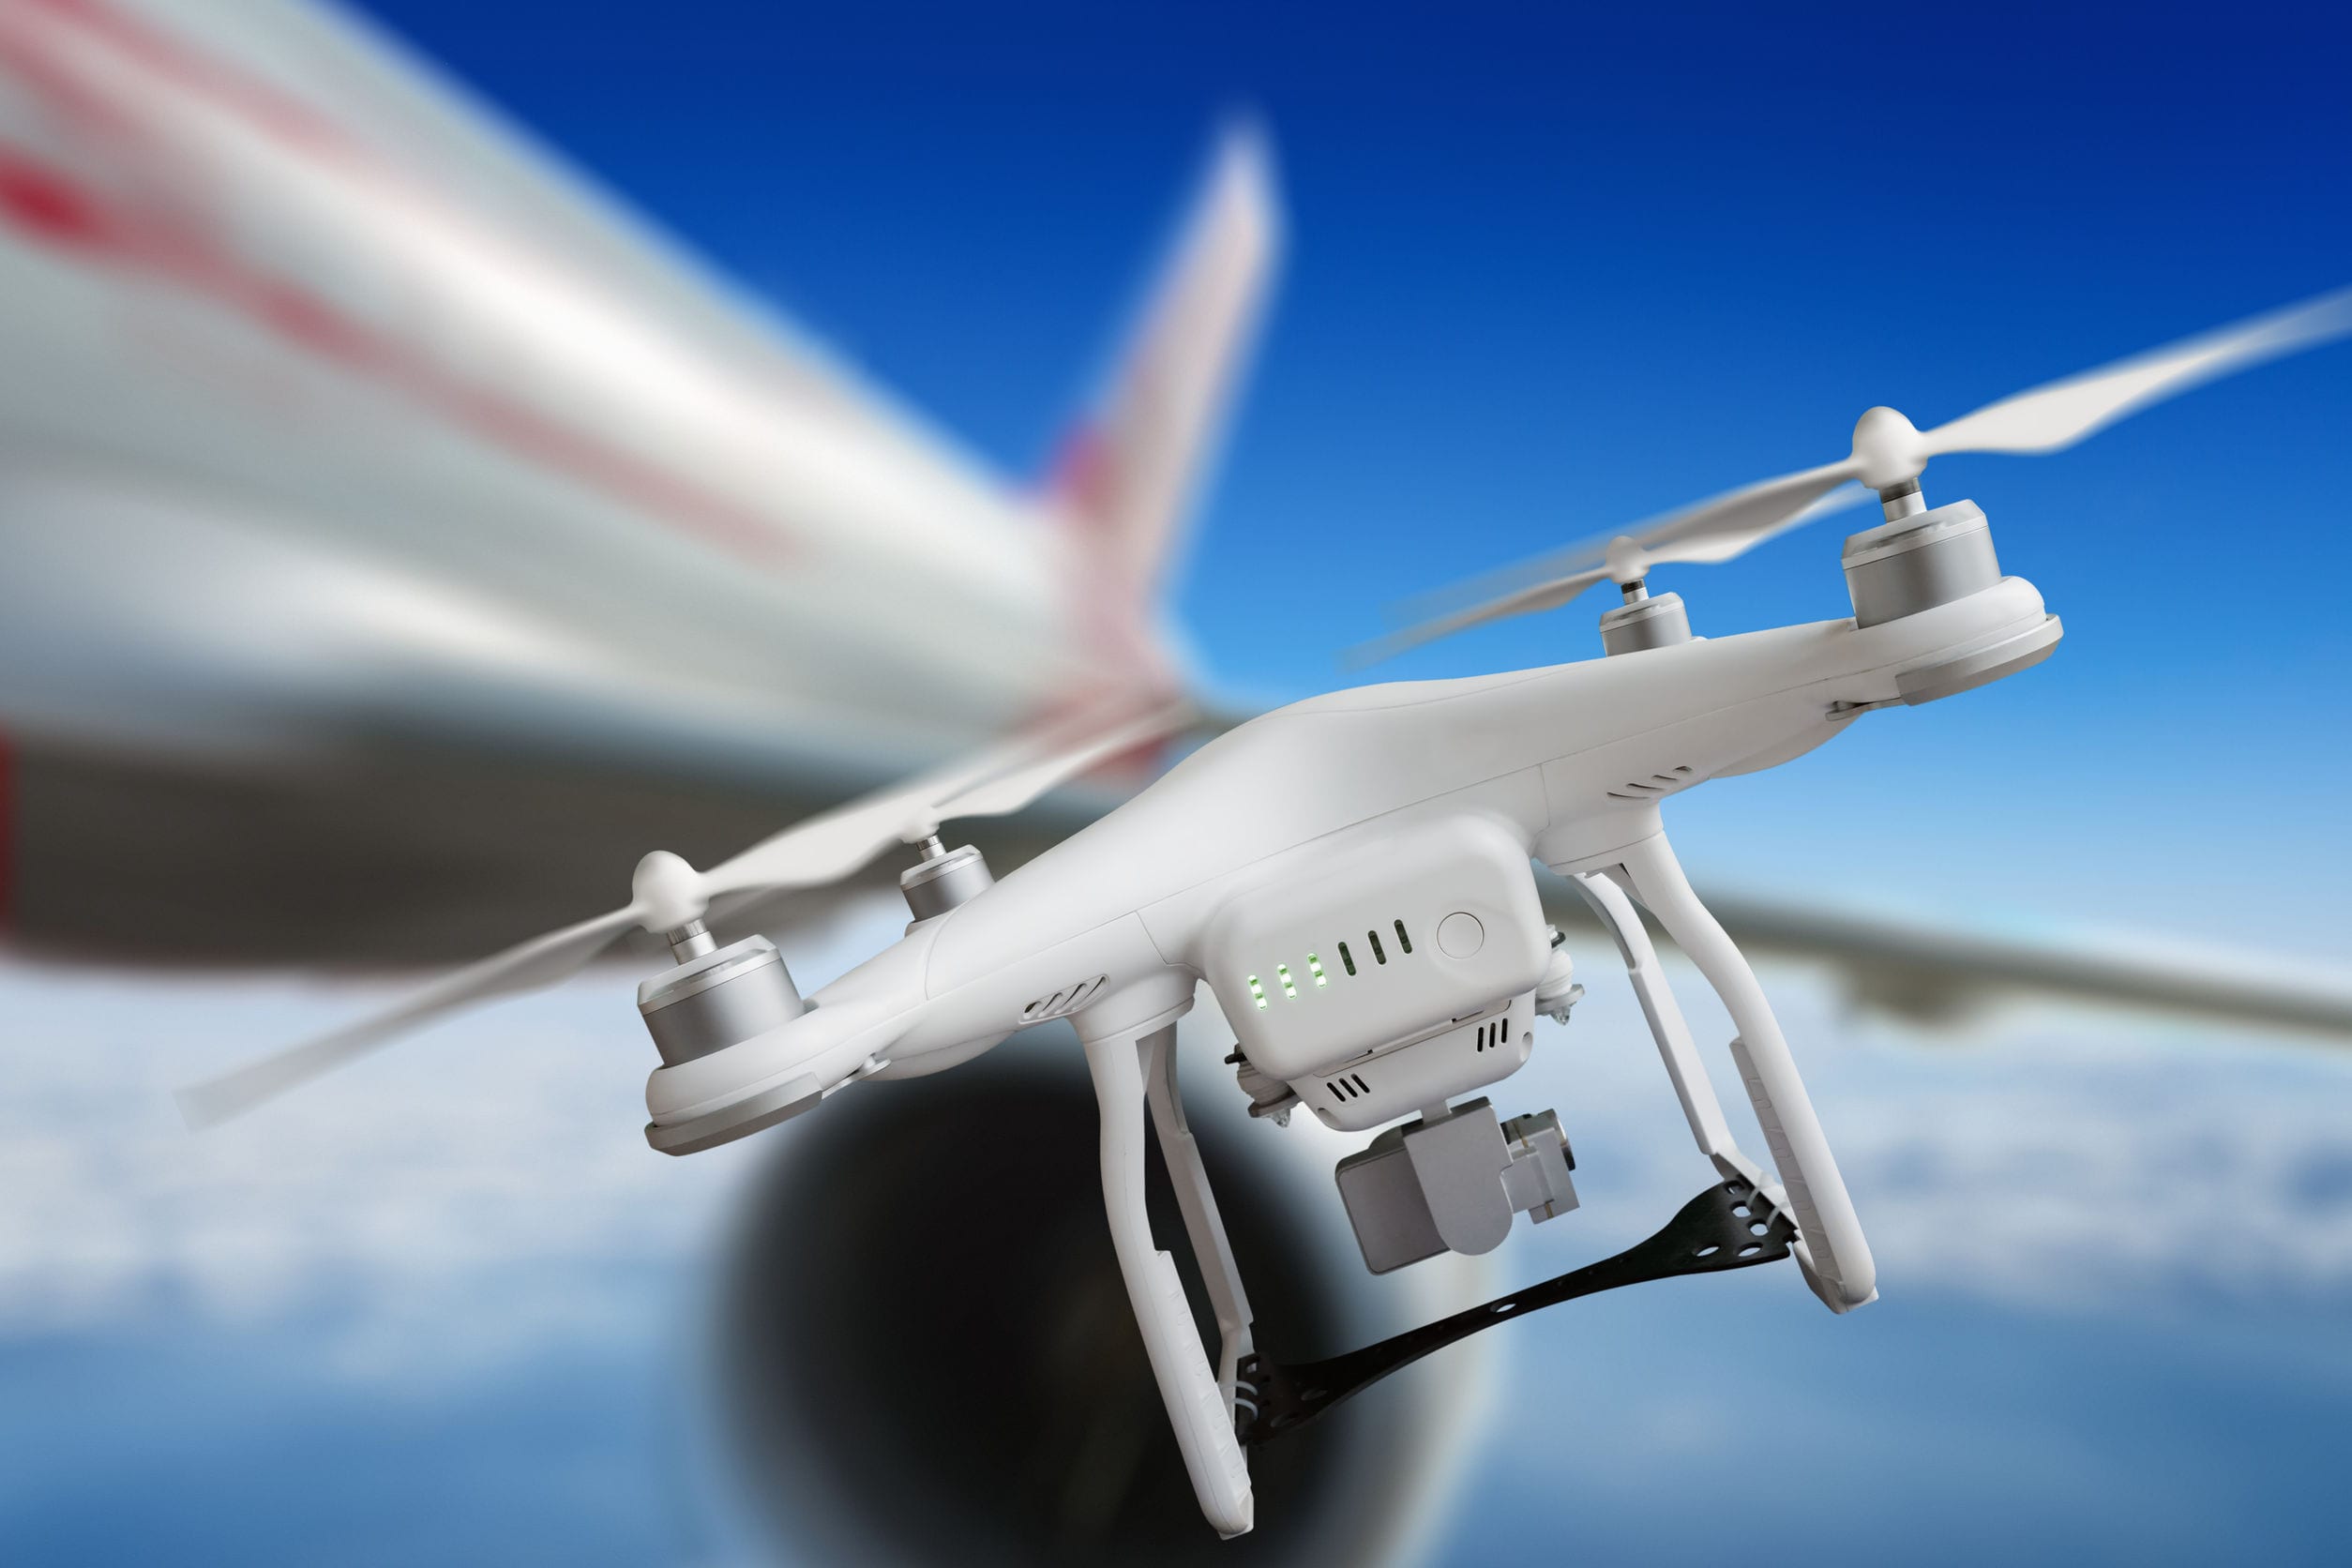 dangerous incident - aircraft passed just near drone and avoided collisions